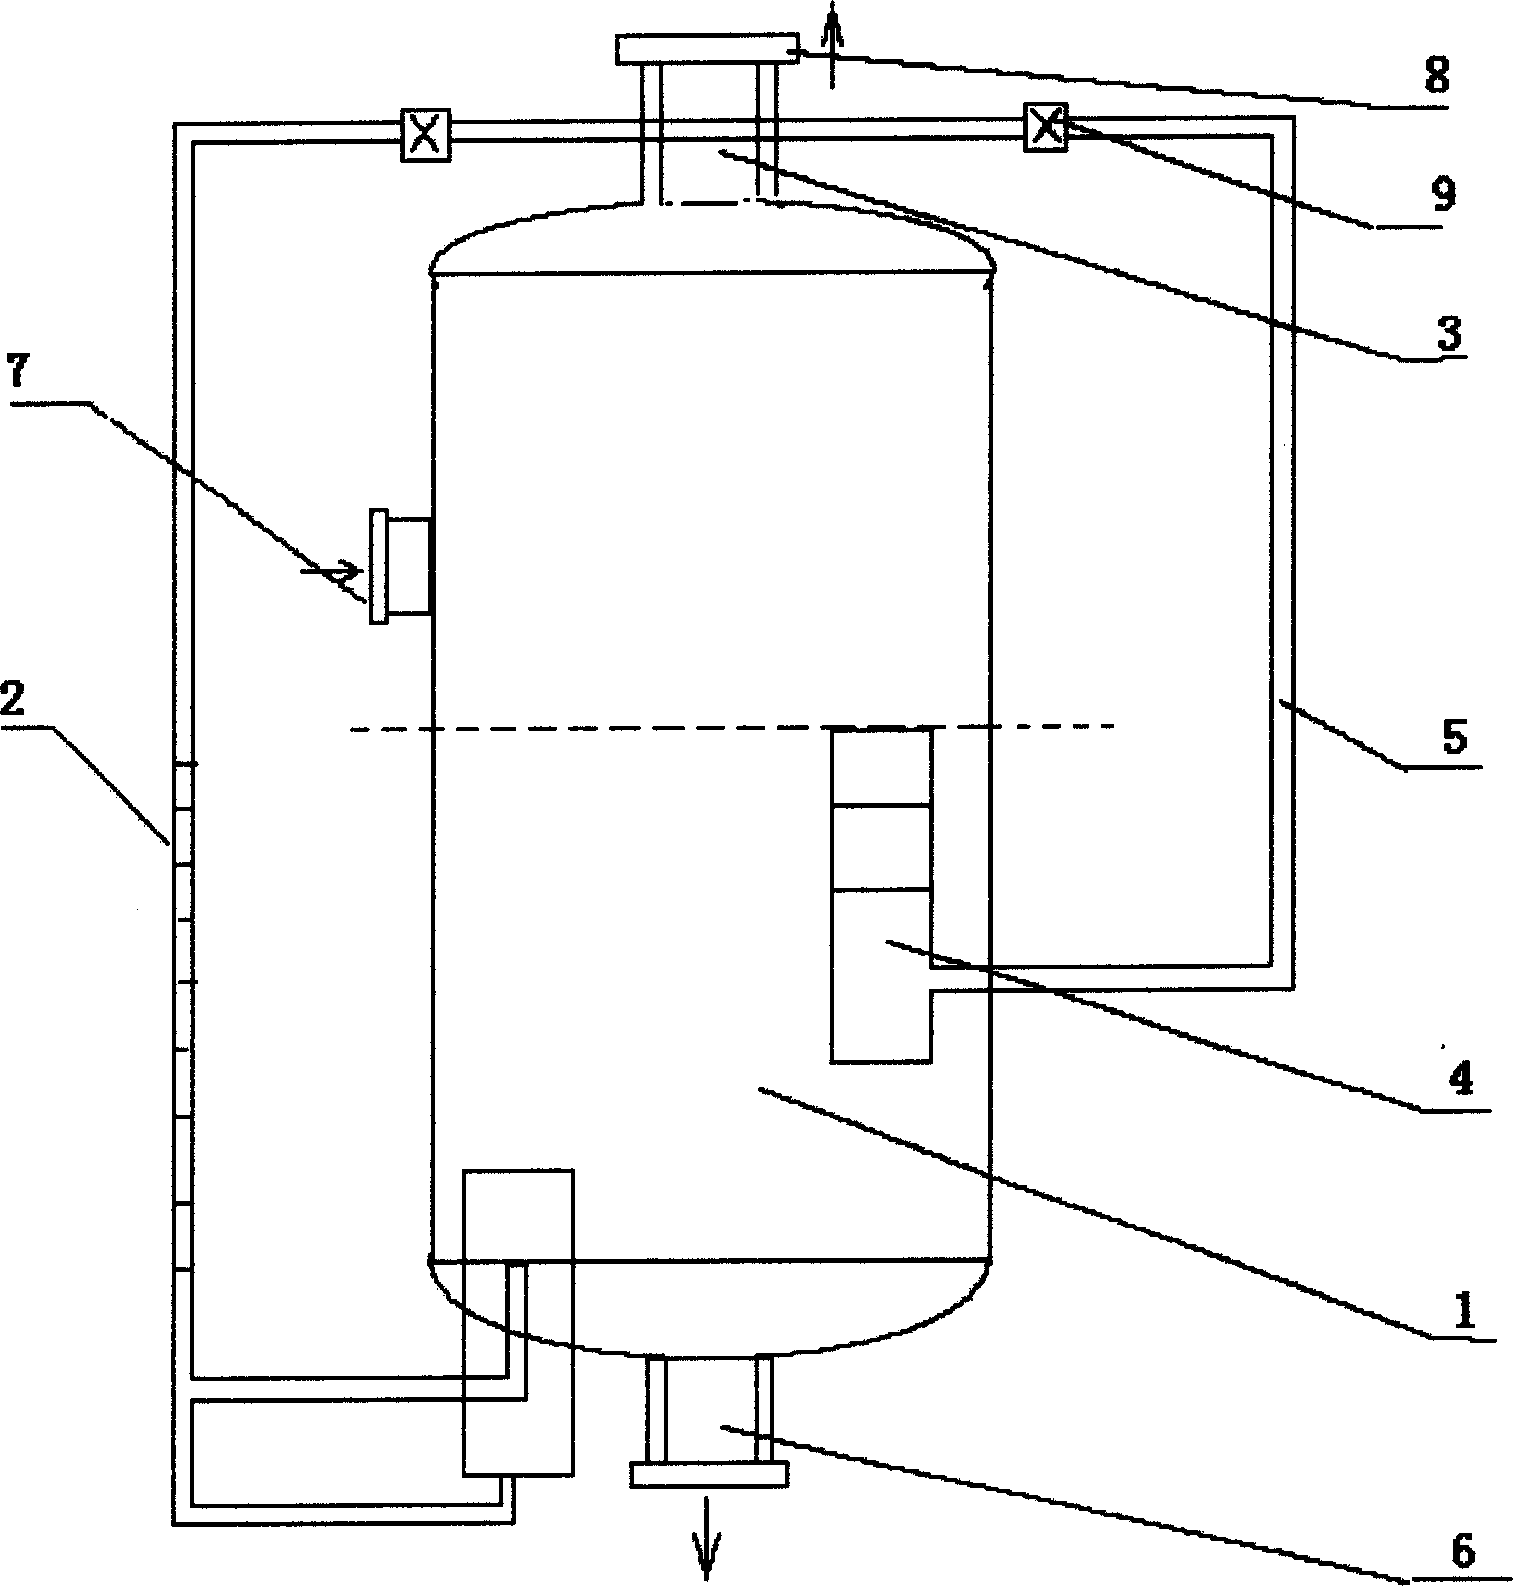 Separater and measuring method for measuring water content of oil well